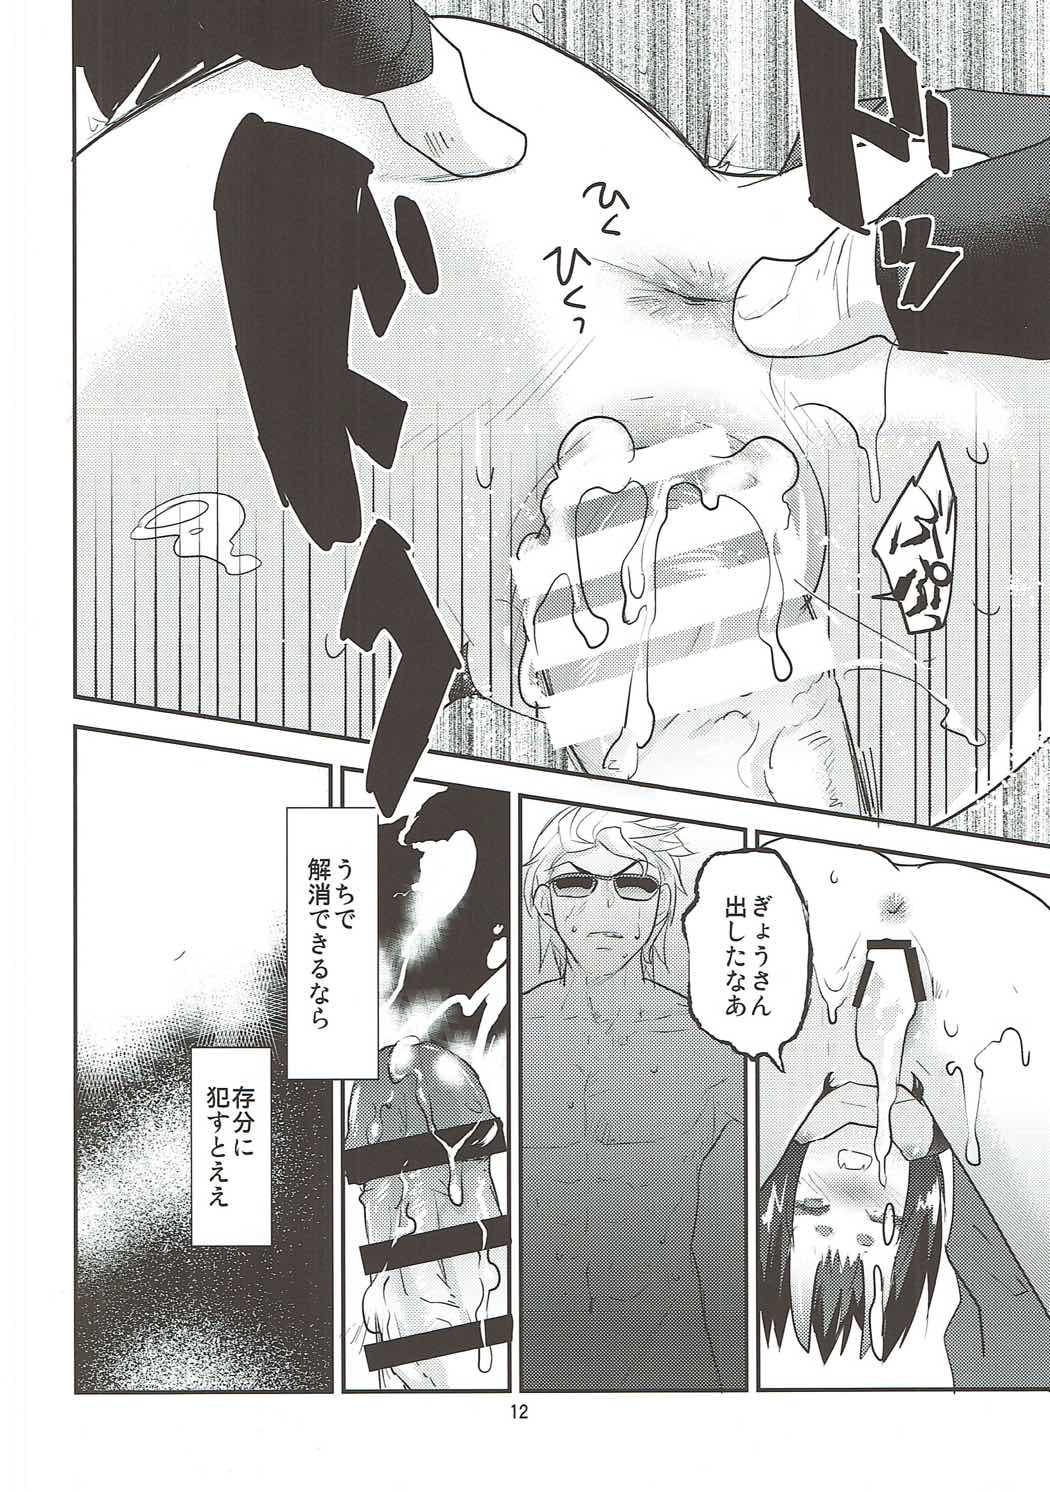 Face Hiasobi - Fate grand order Hot Girls Getting Fucked - Page 11